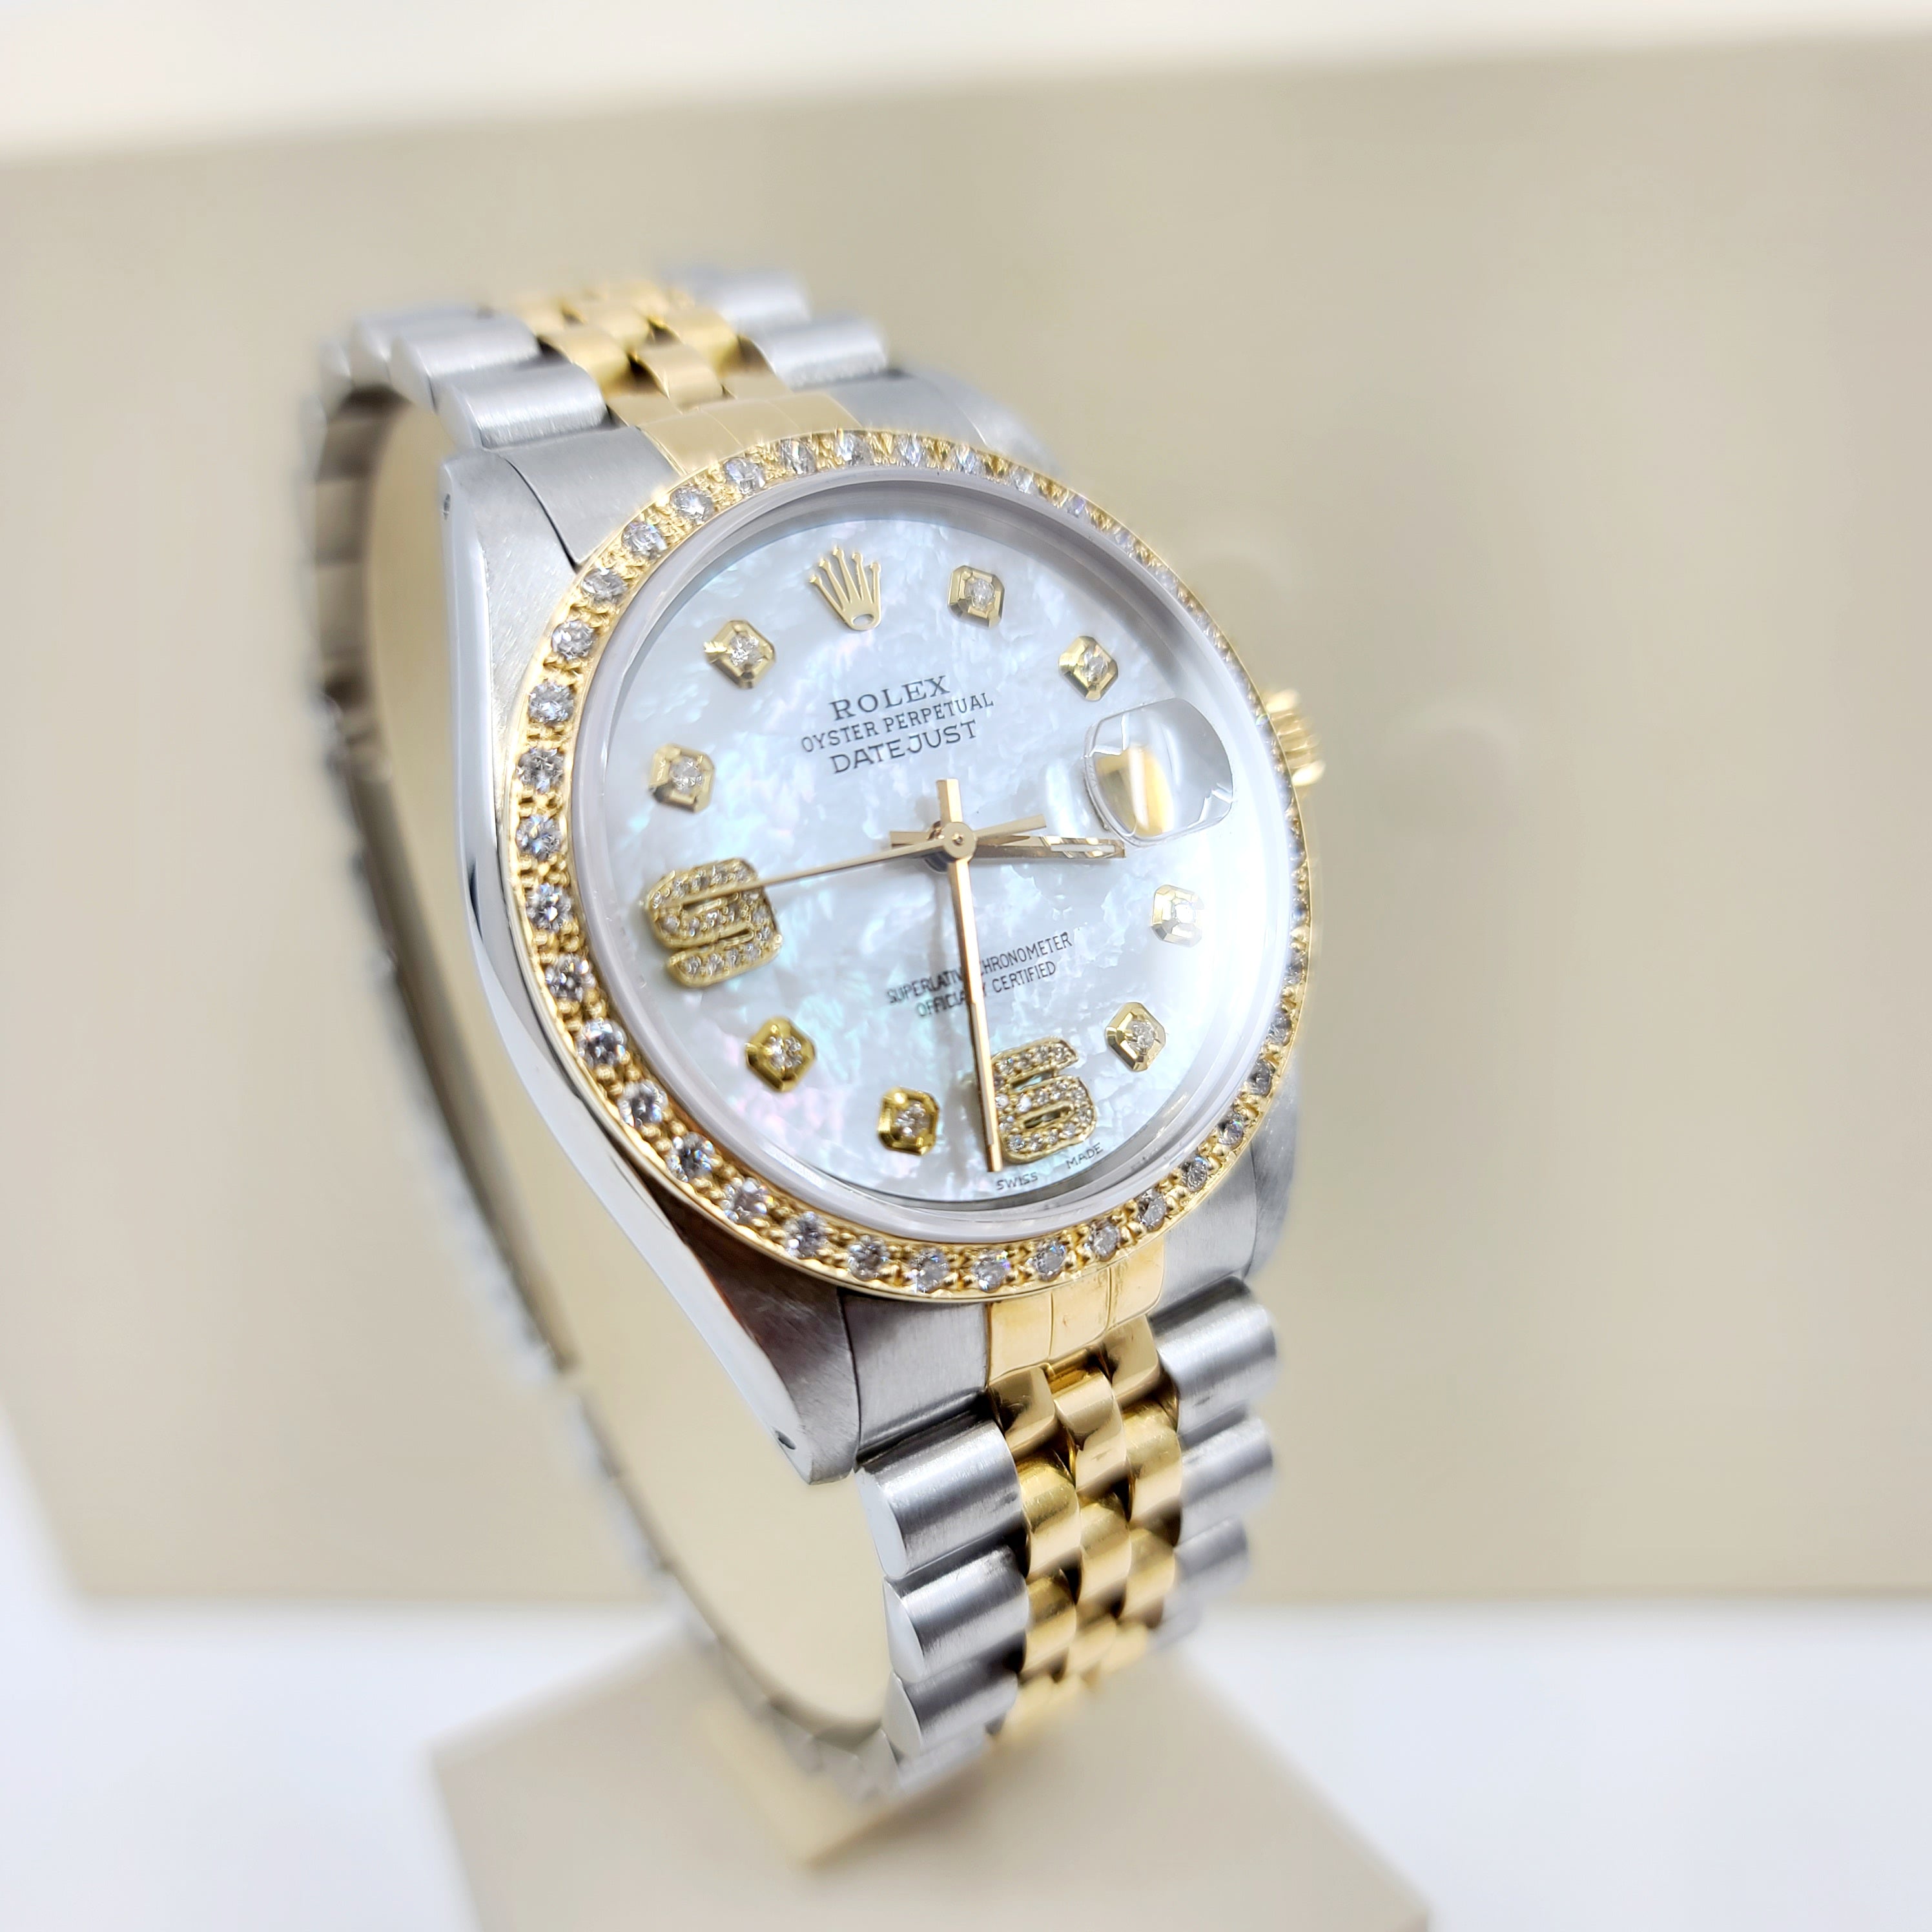 Rolex 16013 Date Just 36mm 18k gold & Steel twotone Pre-Owned